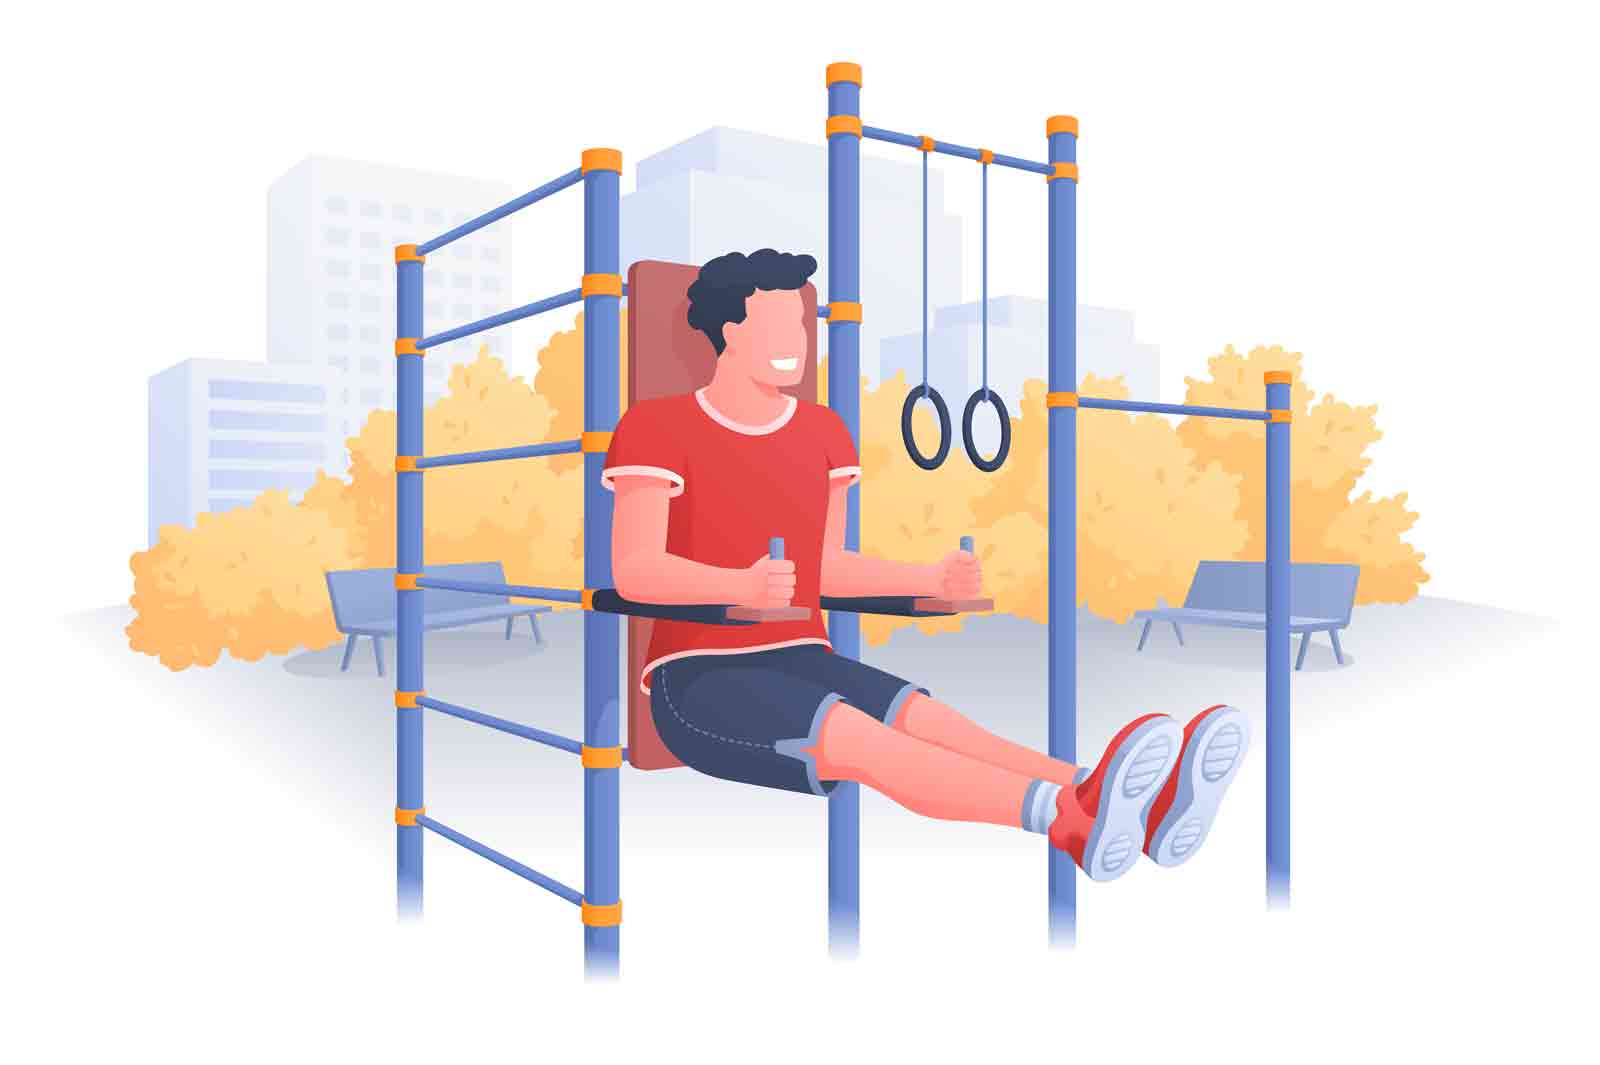 Street workout on sports ground in park vector illustration. Man training on parallel bars flat concept. Healthy and active lifestyle